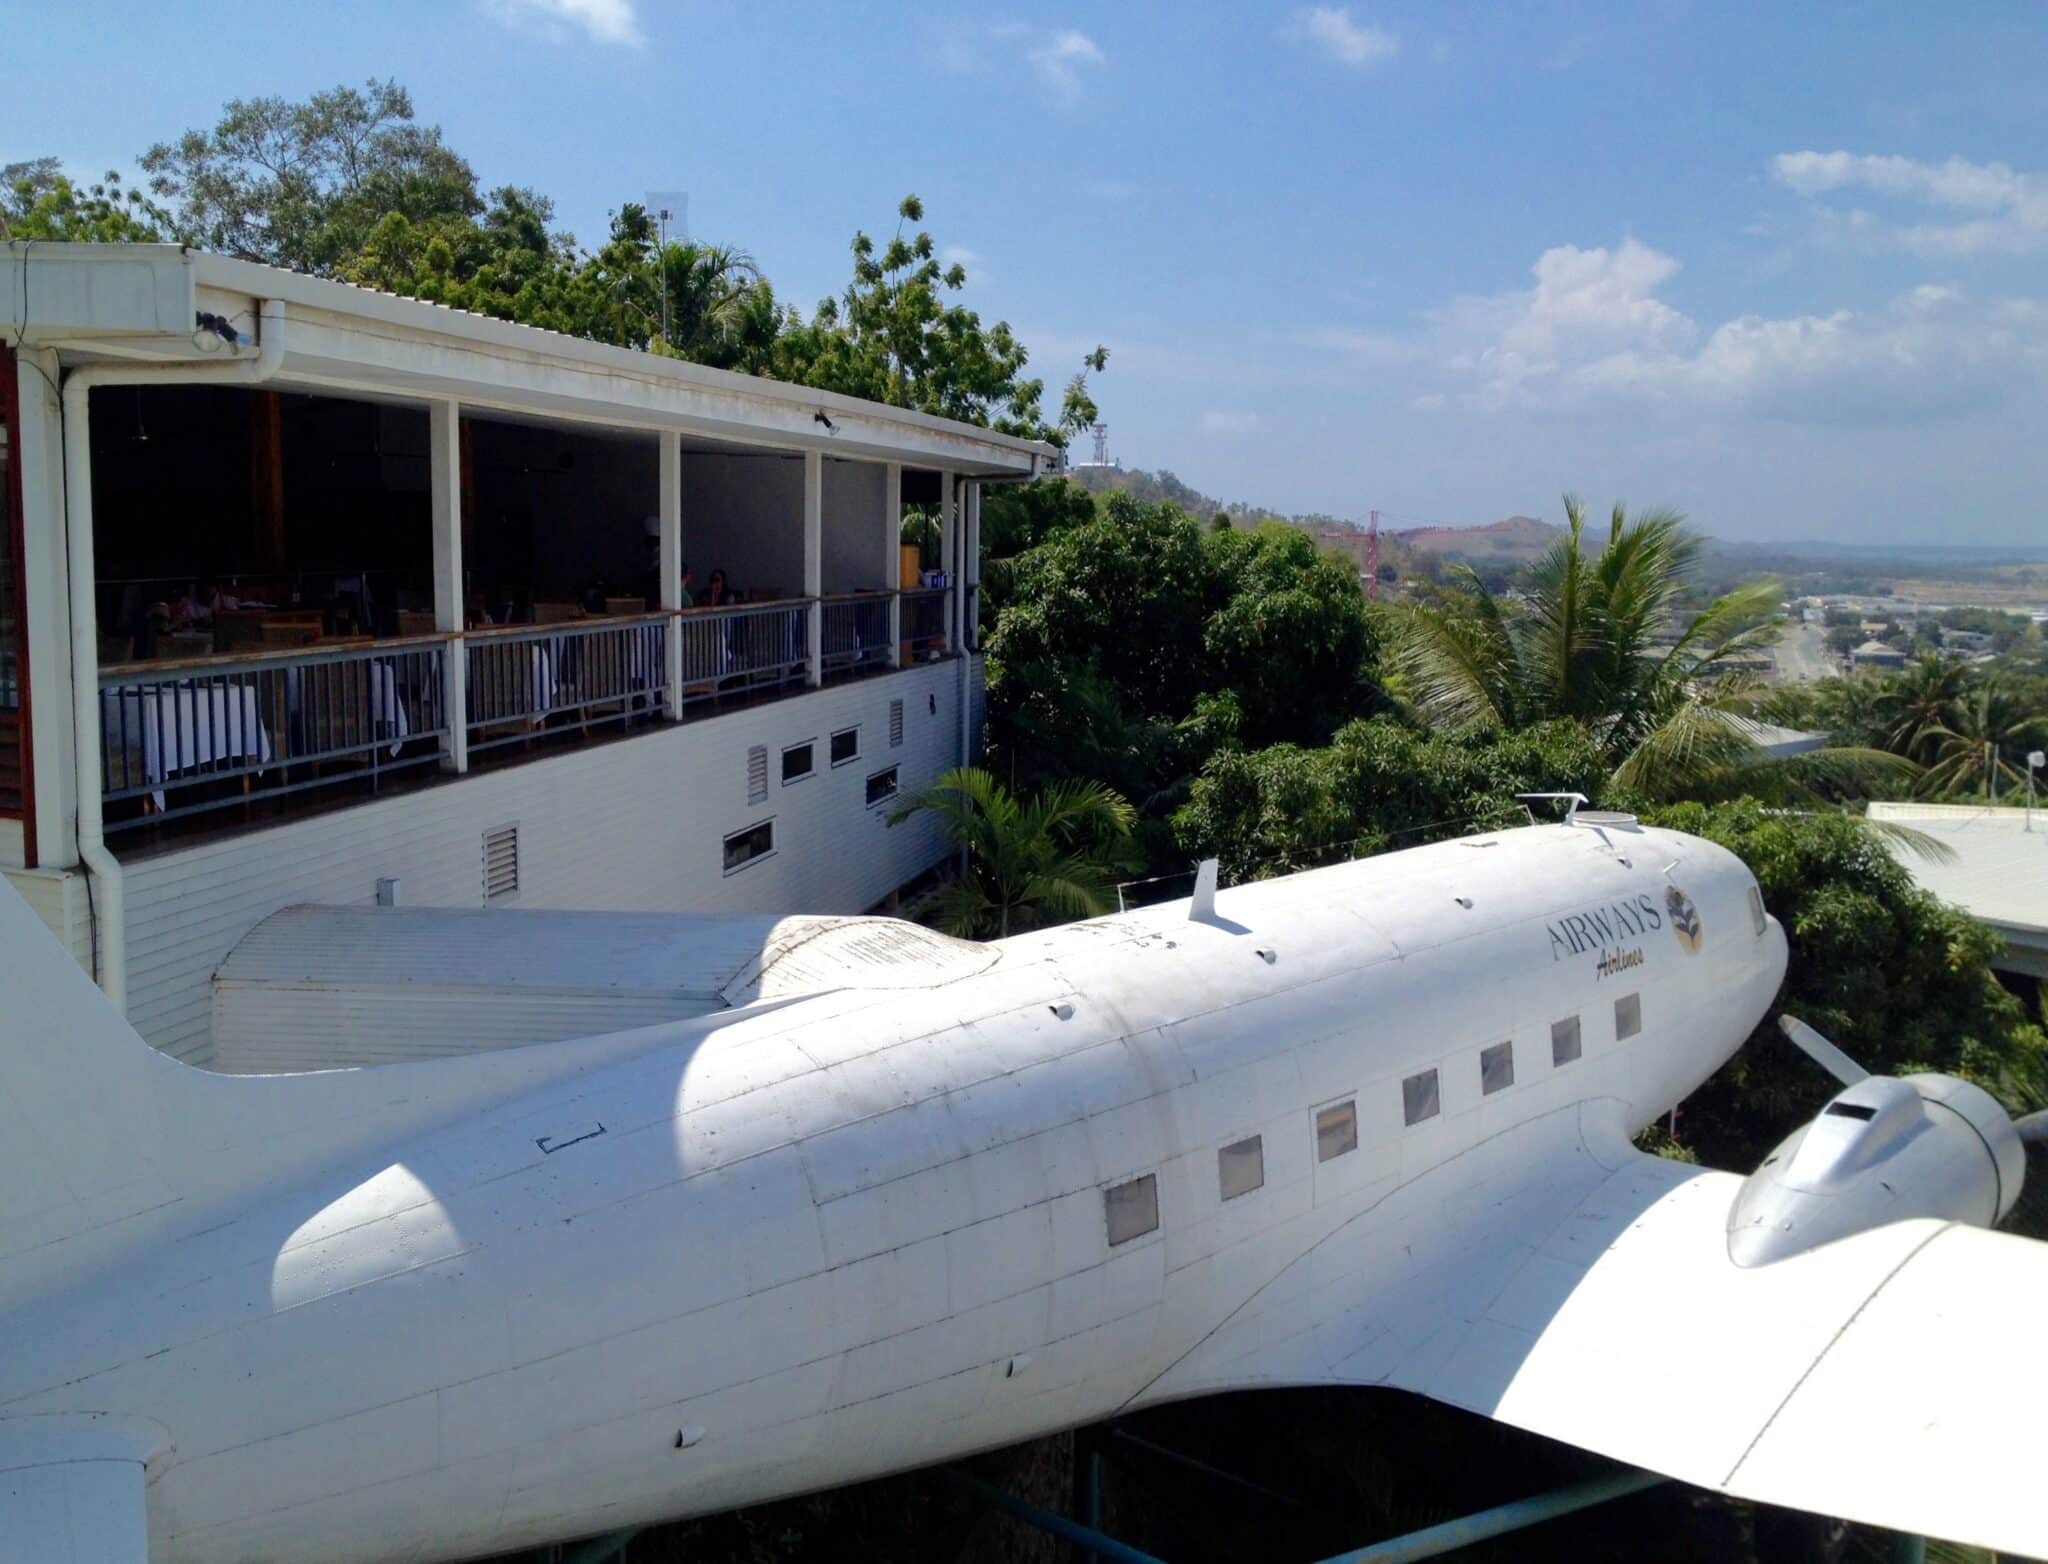 Airways Hotel in Port Moresby